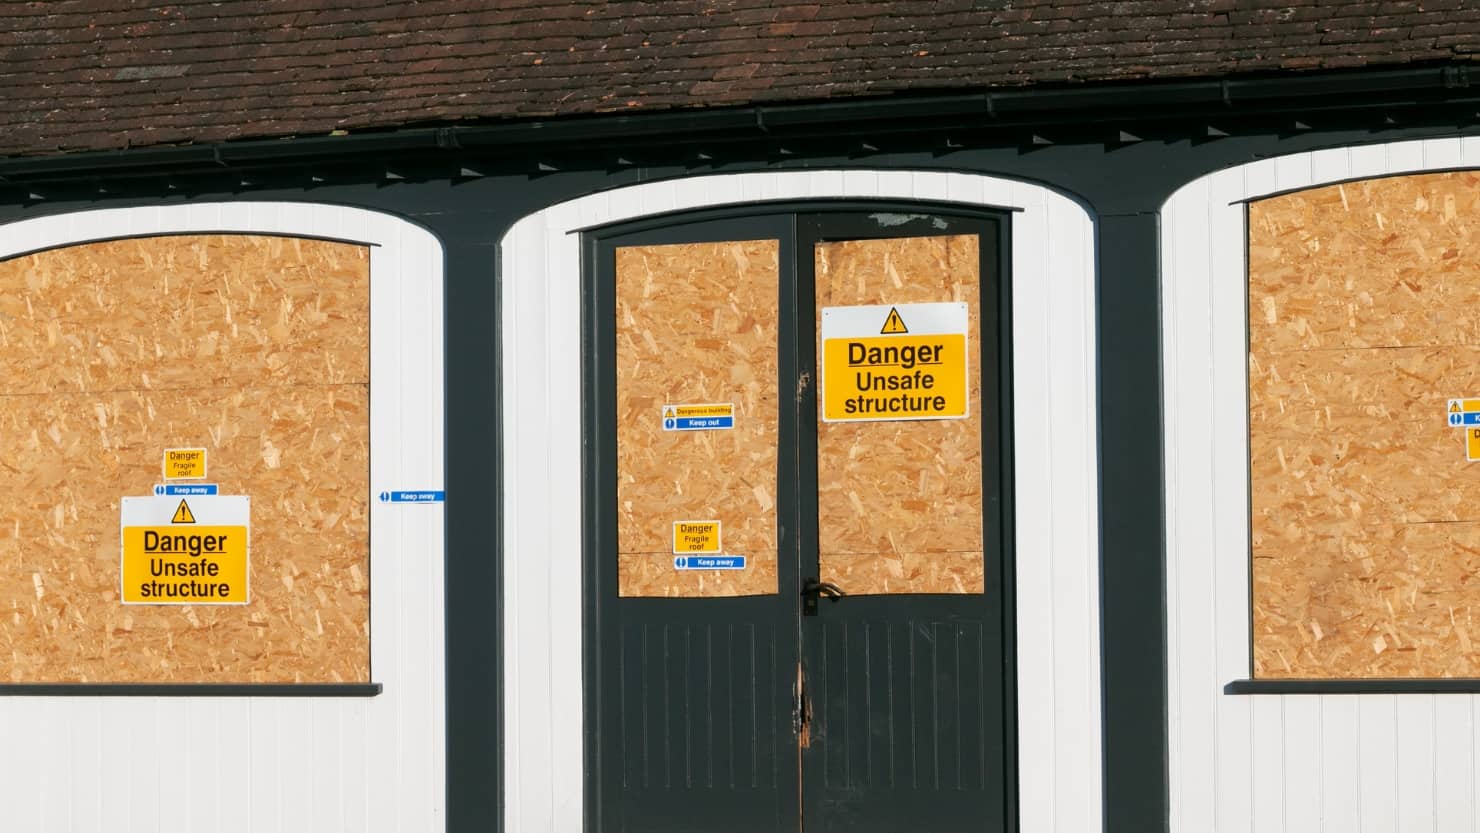 Property windows and doors boarded up for security, with a sign stating danger unsafe structure